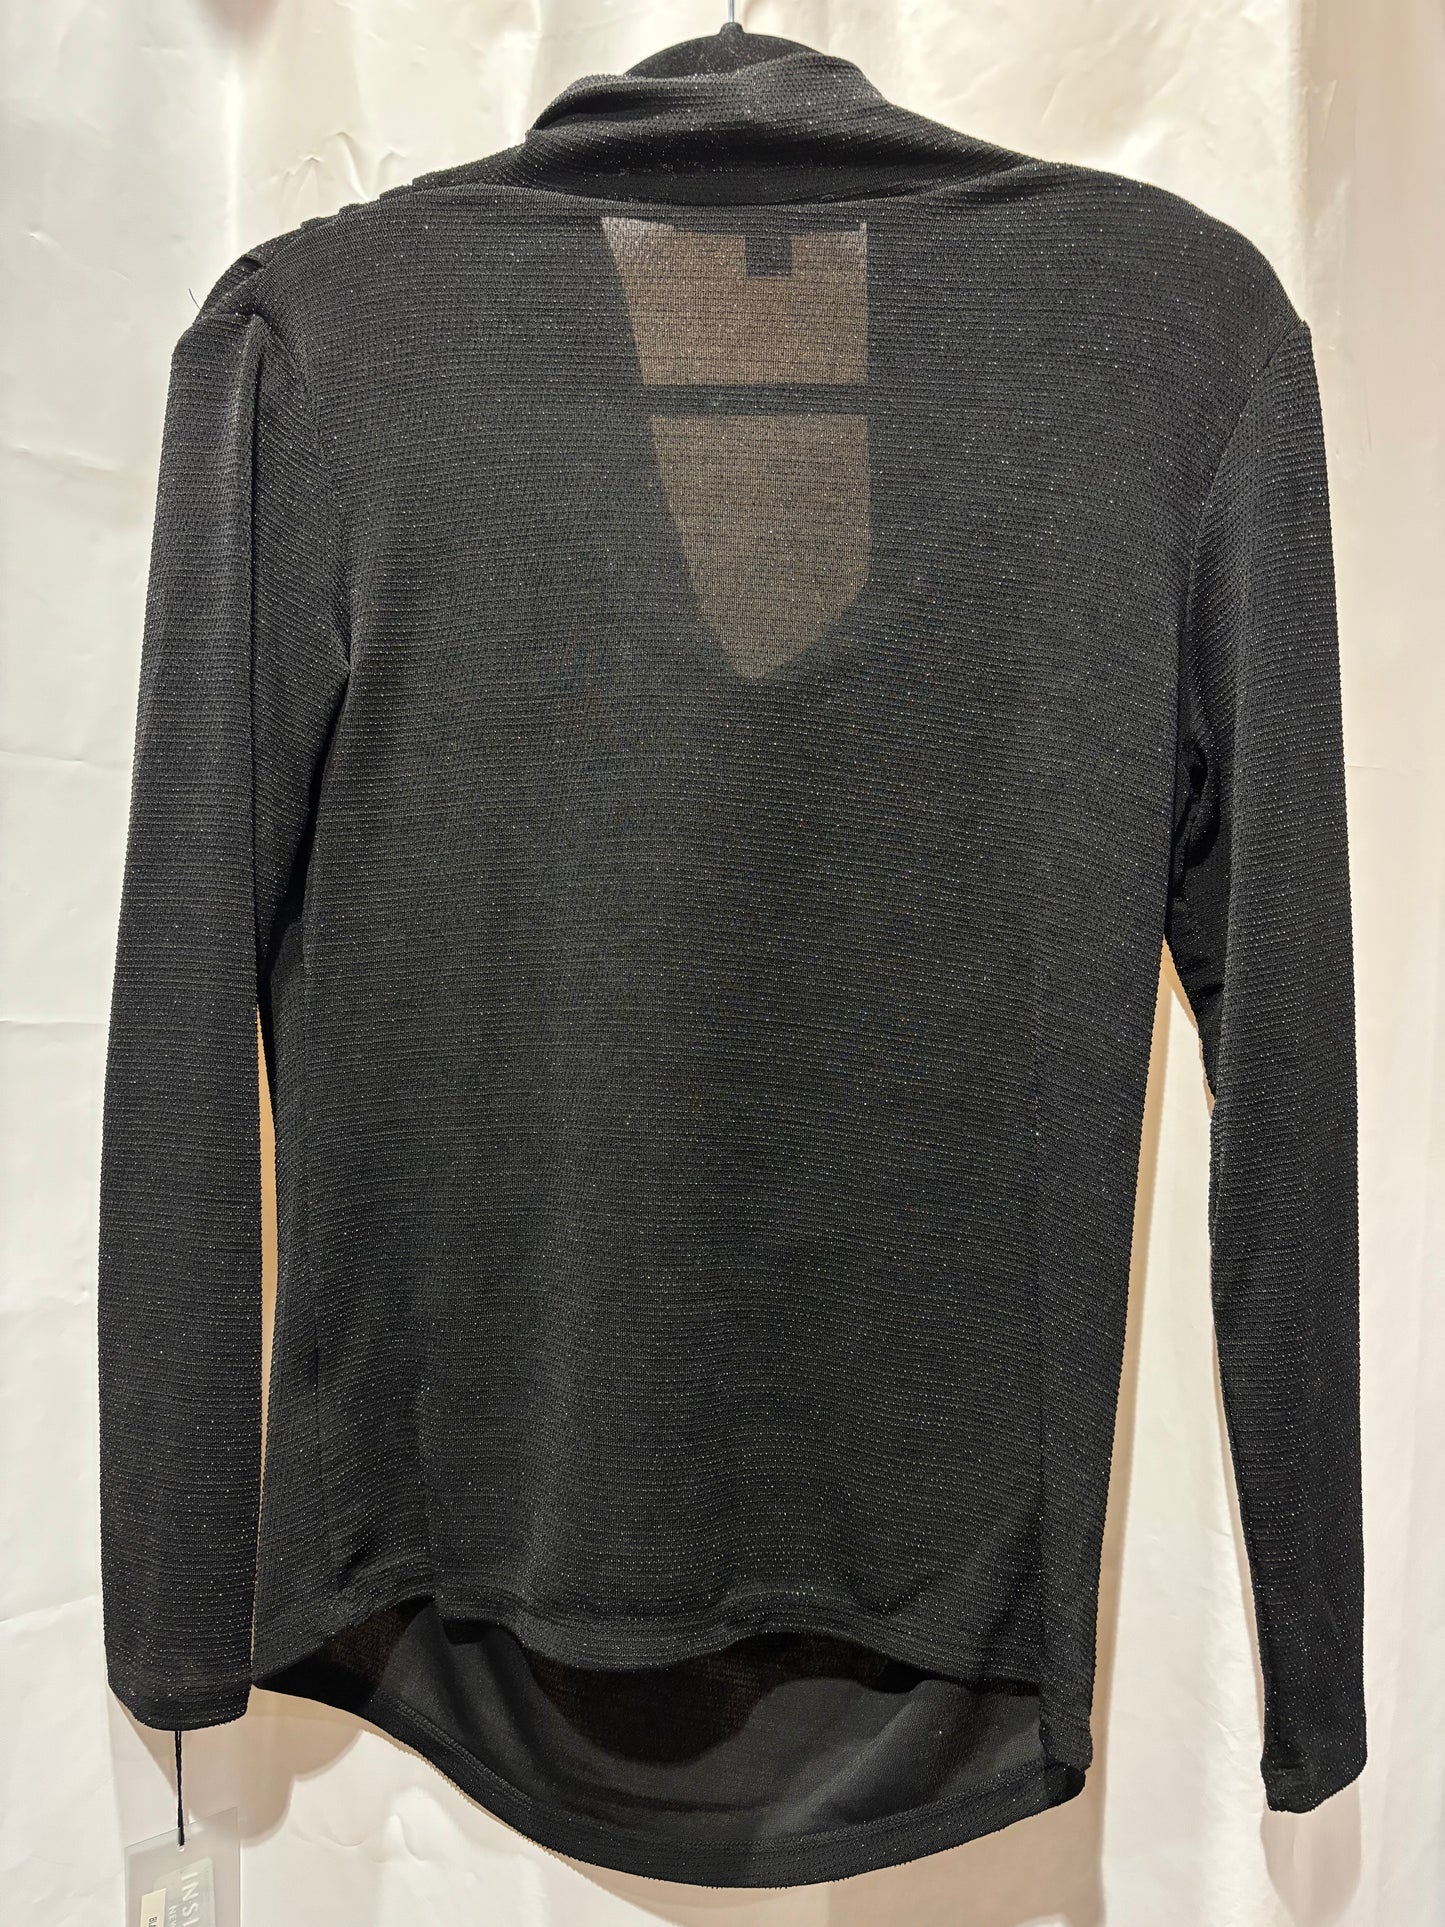 Black Shimmer Blouse with Cowl Neck